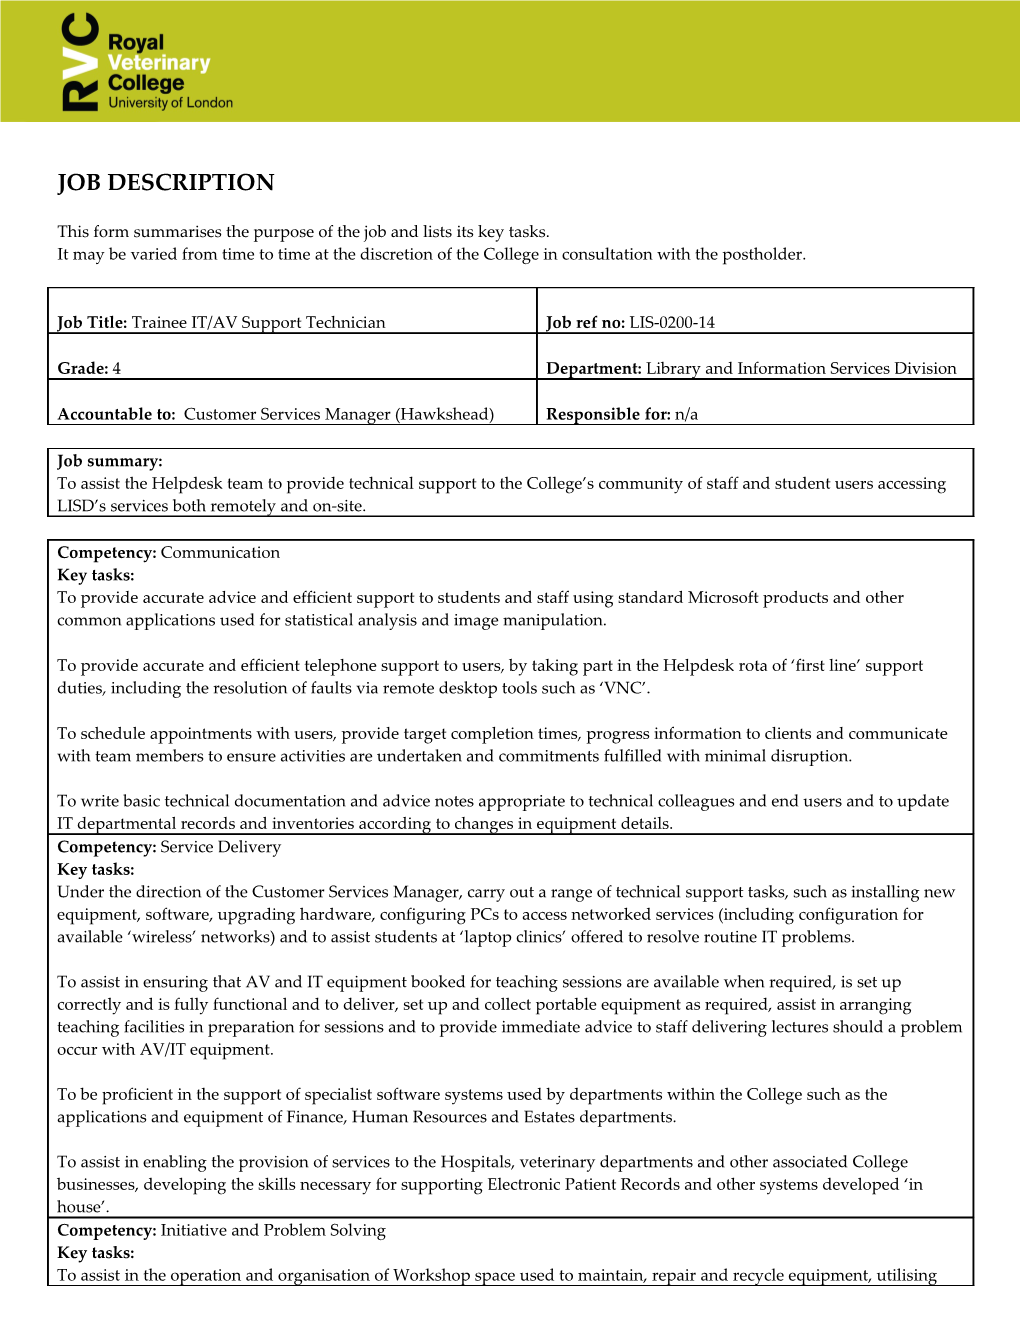 This Form Summarises the Purpose of the Job and Lists Its Key Tasks s1